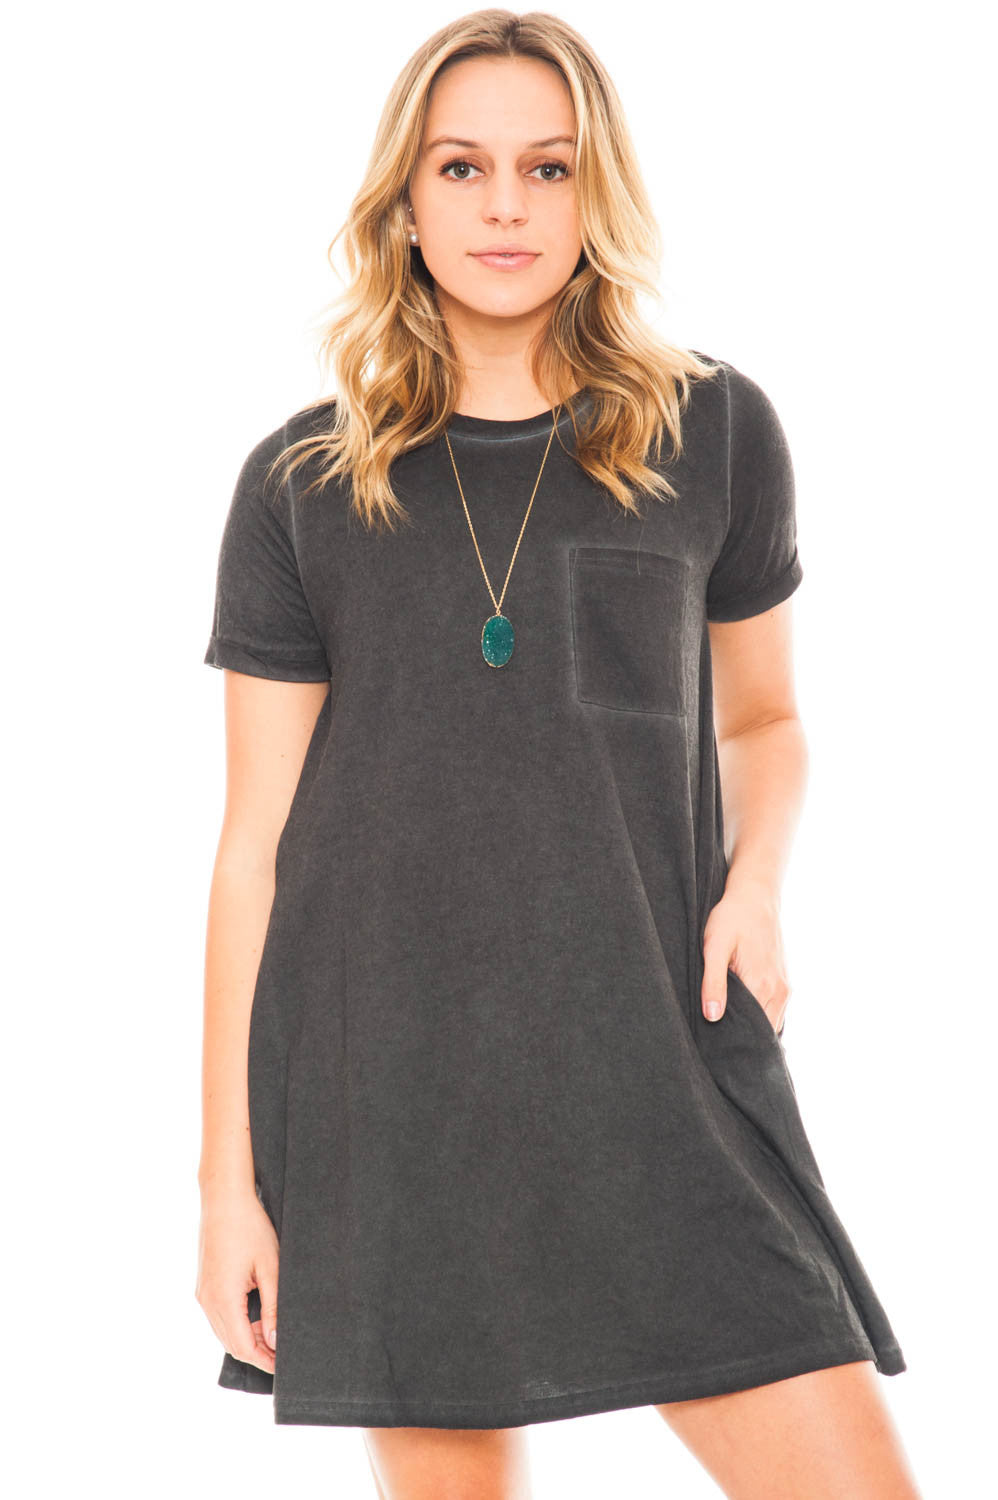 Dress - Casual T-shirt Dress with Pockets